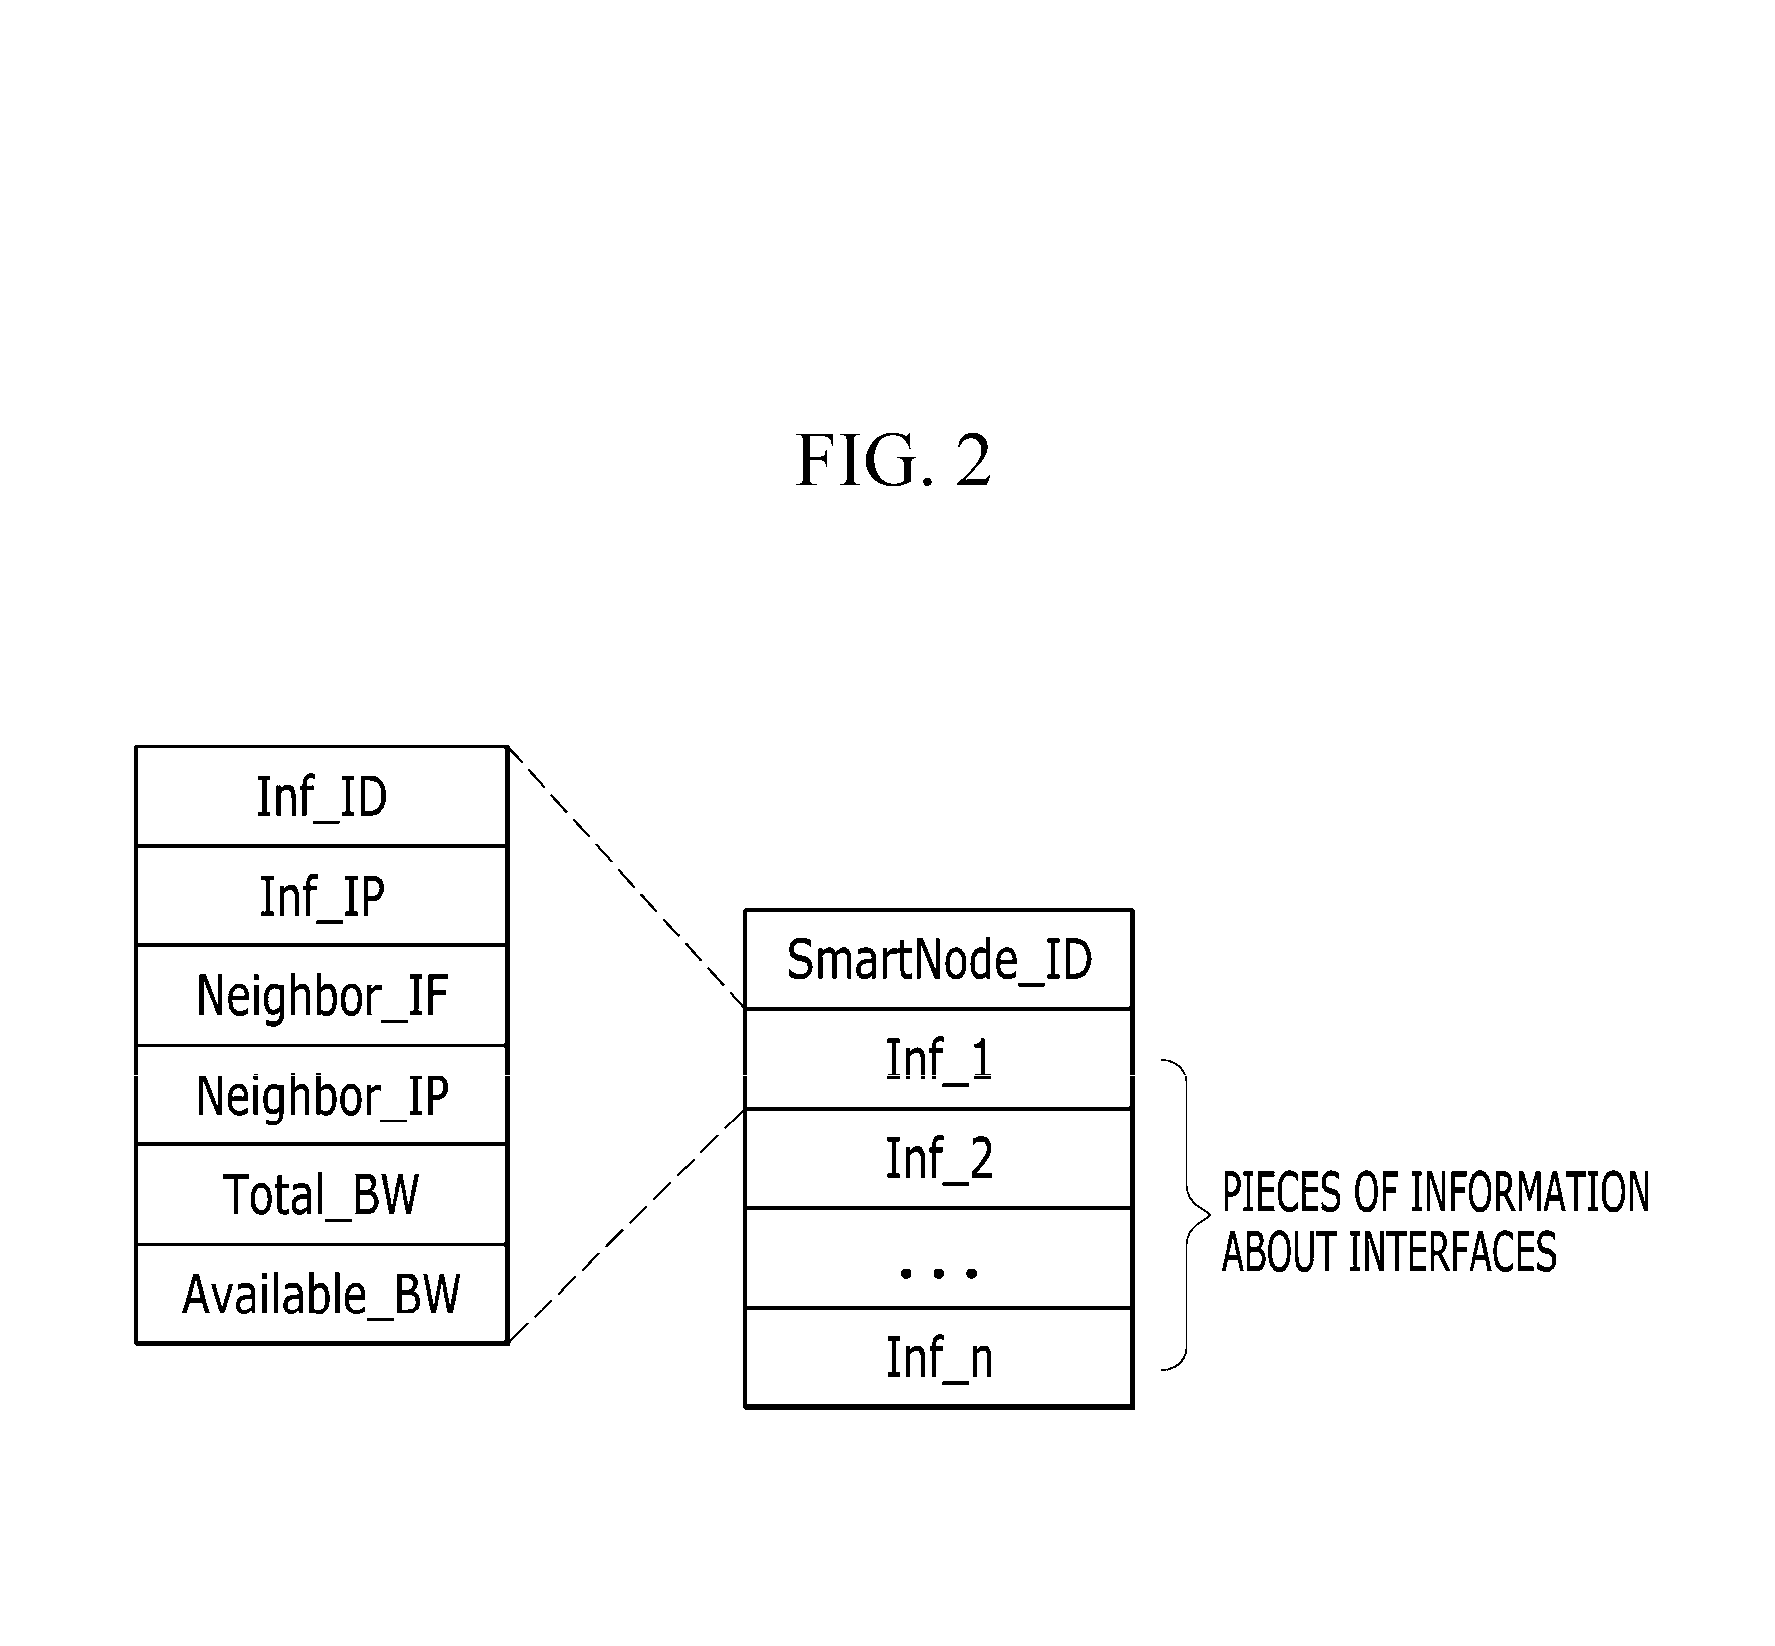 Method and node apparatus for collecting information in content network based on information-centric networking